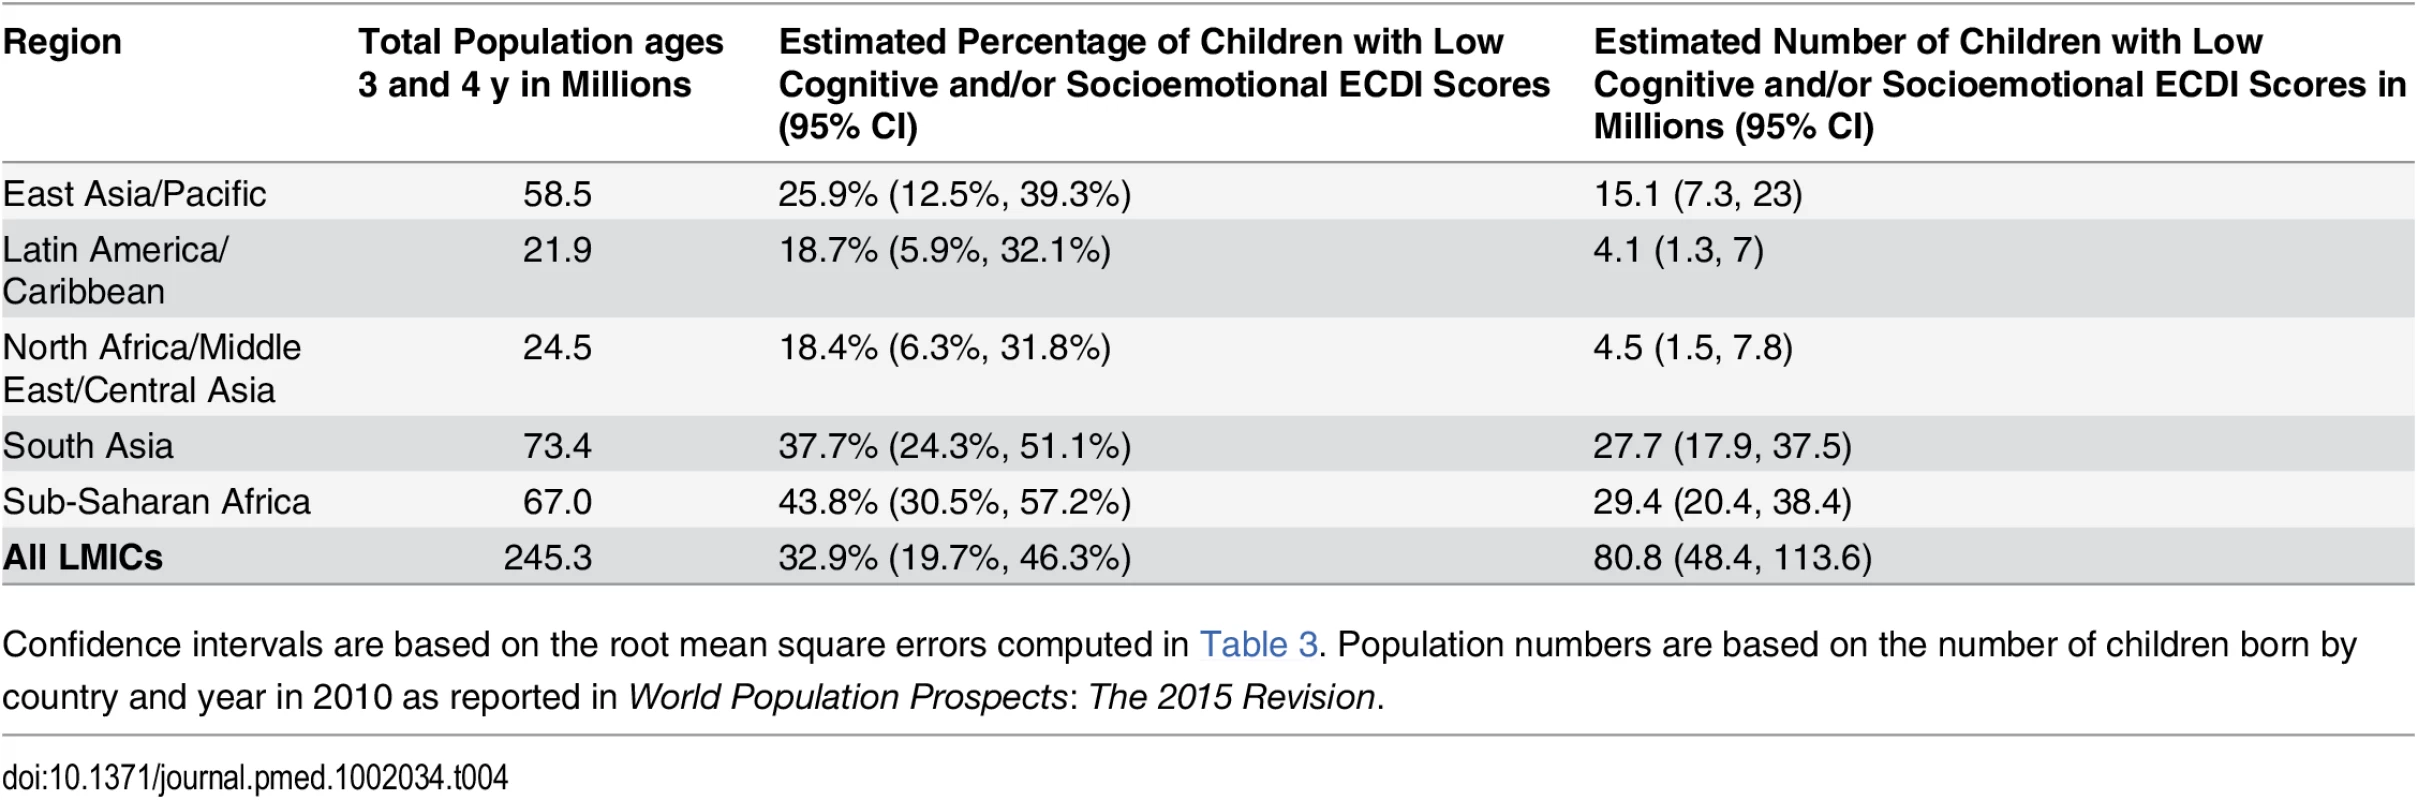 Estimated number of 3- and 4-y-olds with low development according to the ECDI by region.